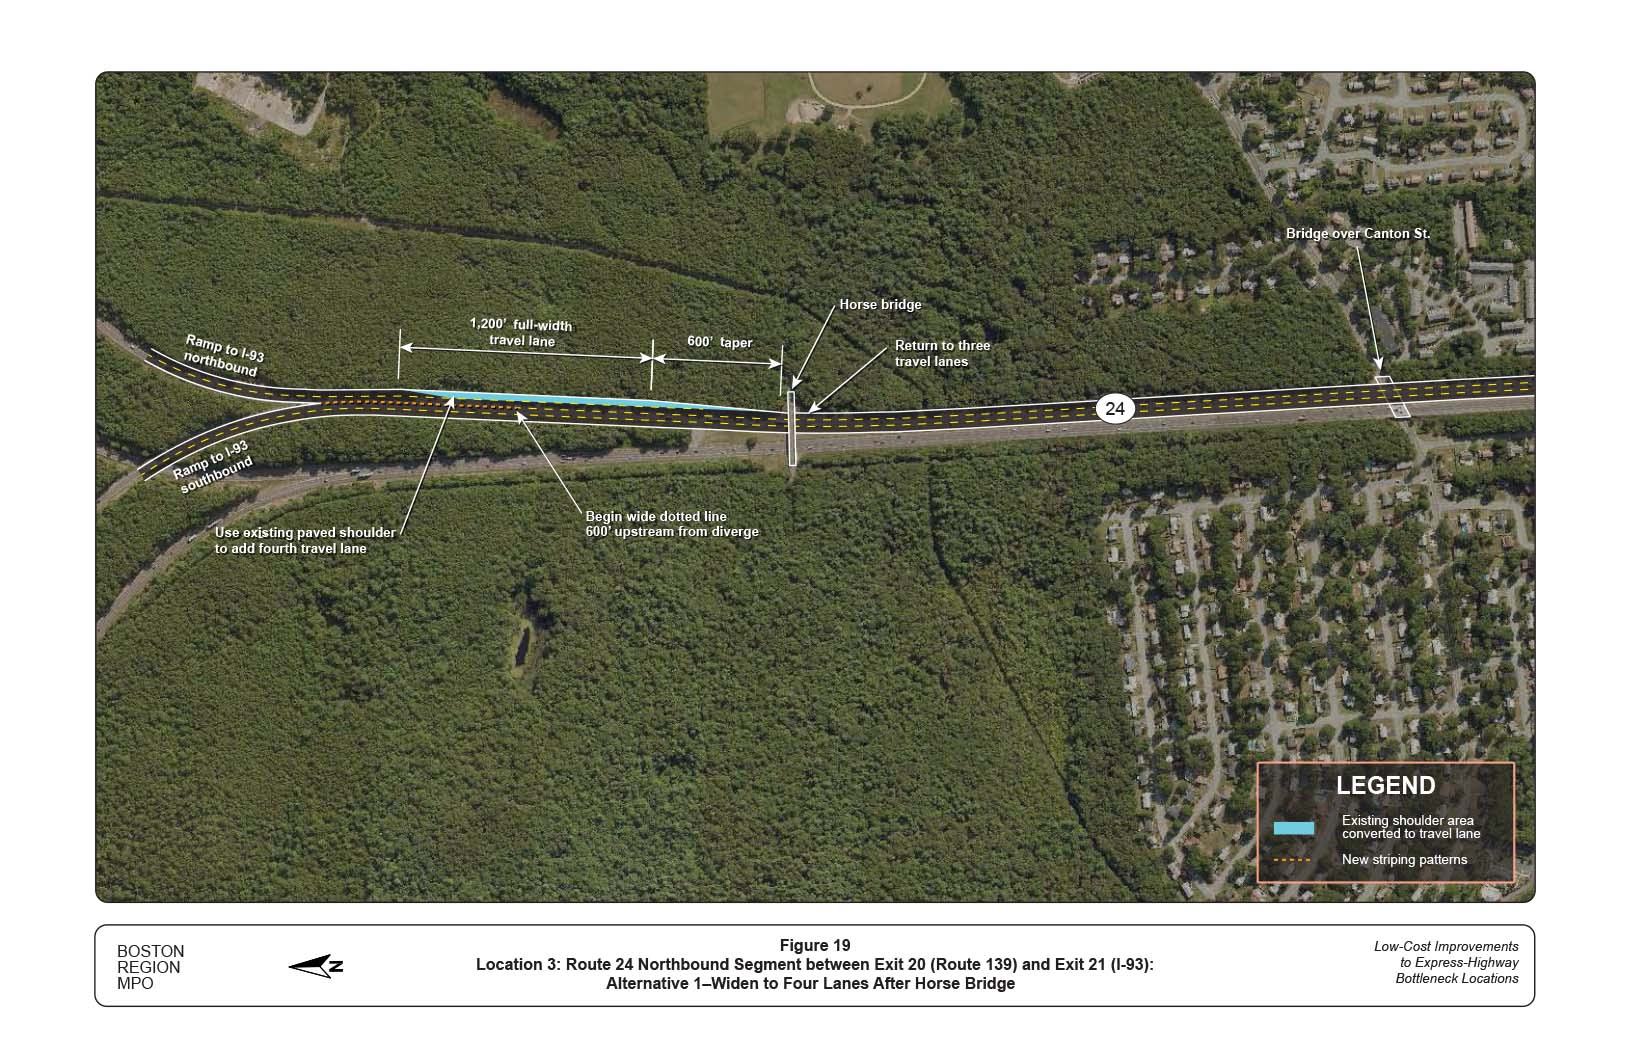 FIGURE 19. Location 3: Route 24 Northbound Segment between Exit 20 (Route 139) and Exit 21 (I-93): Alternative 1–Widen to Four Lanes After Horse Bridge
Figure 19 shows an alternative improvement in this location to address safety and operational issues at the bottleneck. The figure shows the widening of Route 24 northbound to four lanes for a stretch of approximately 1,200 feet between the I-93 interchange and the horse bridge. 
